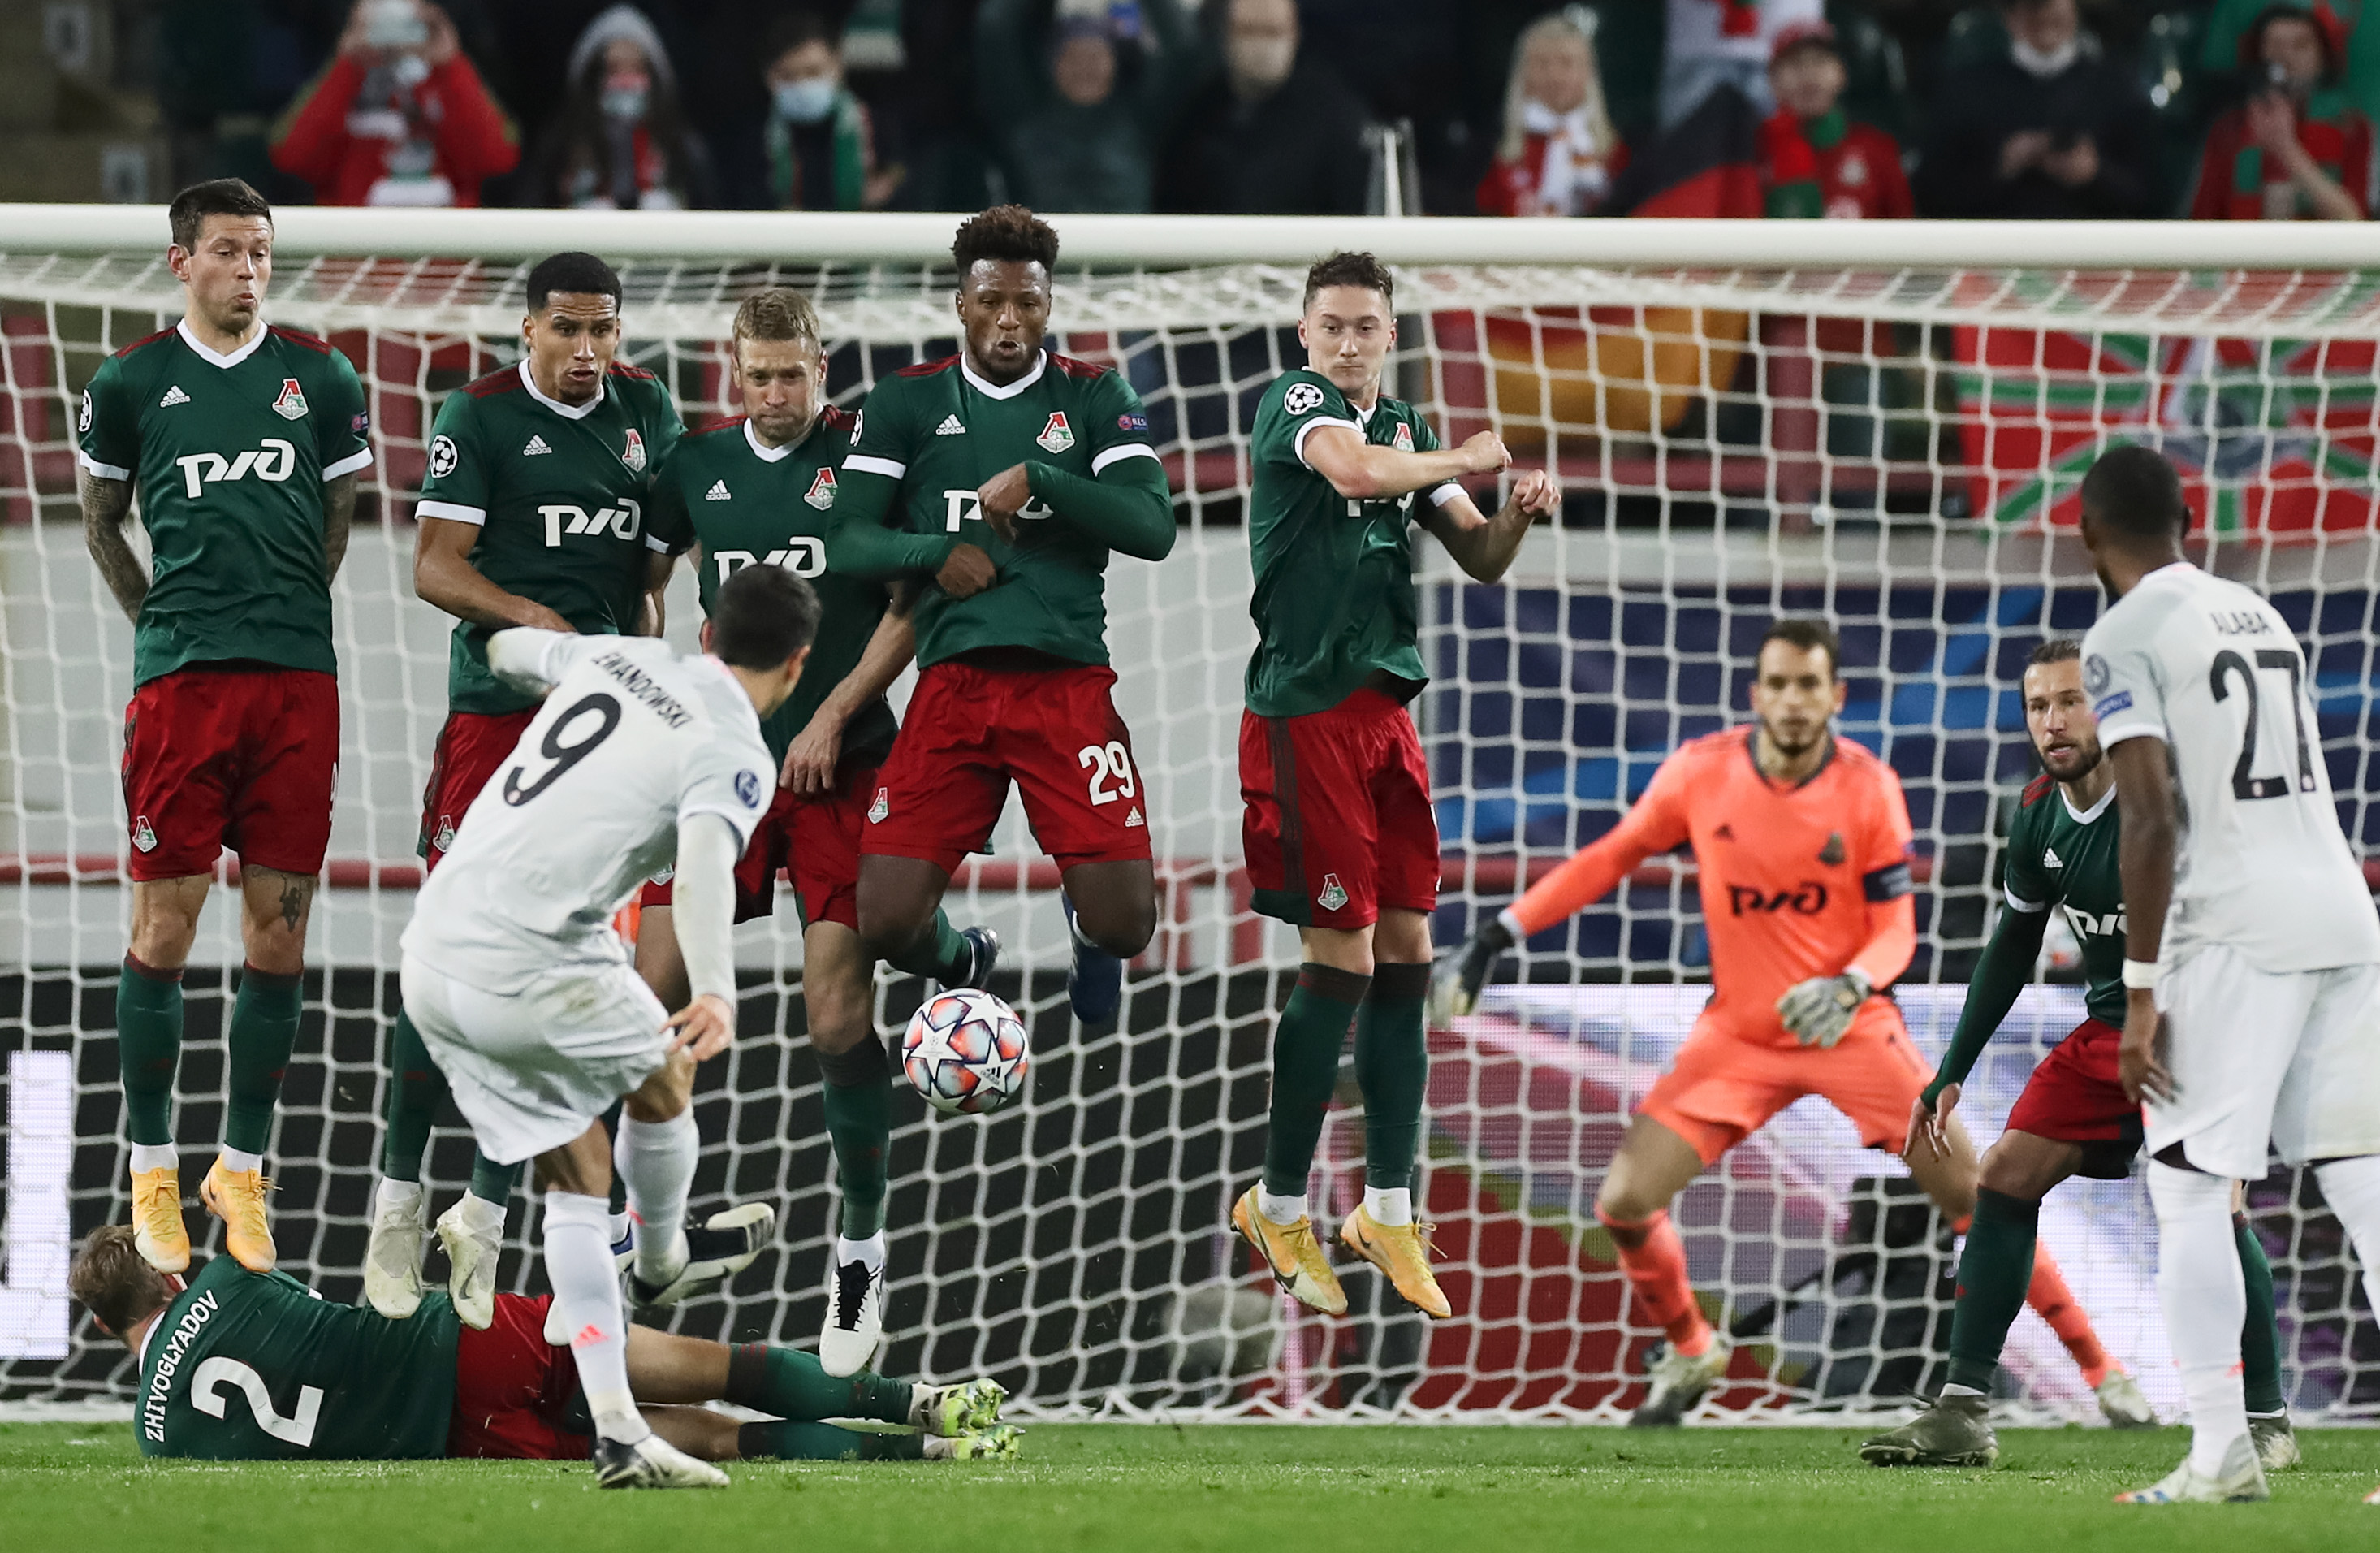 Bayern Munich's Robert Lewandowski shoots at goal from a free kick as Lokomotiv Moscow's Dmitri Zhivoglyadov lies on the ground behind the defensive wall during their Champions League Group A match at RZD Arena, in Moscow, Russia, on  October 27, 2020. Photo: Pool via Reuters